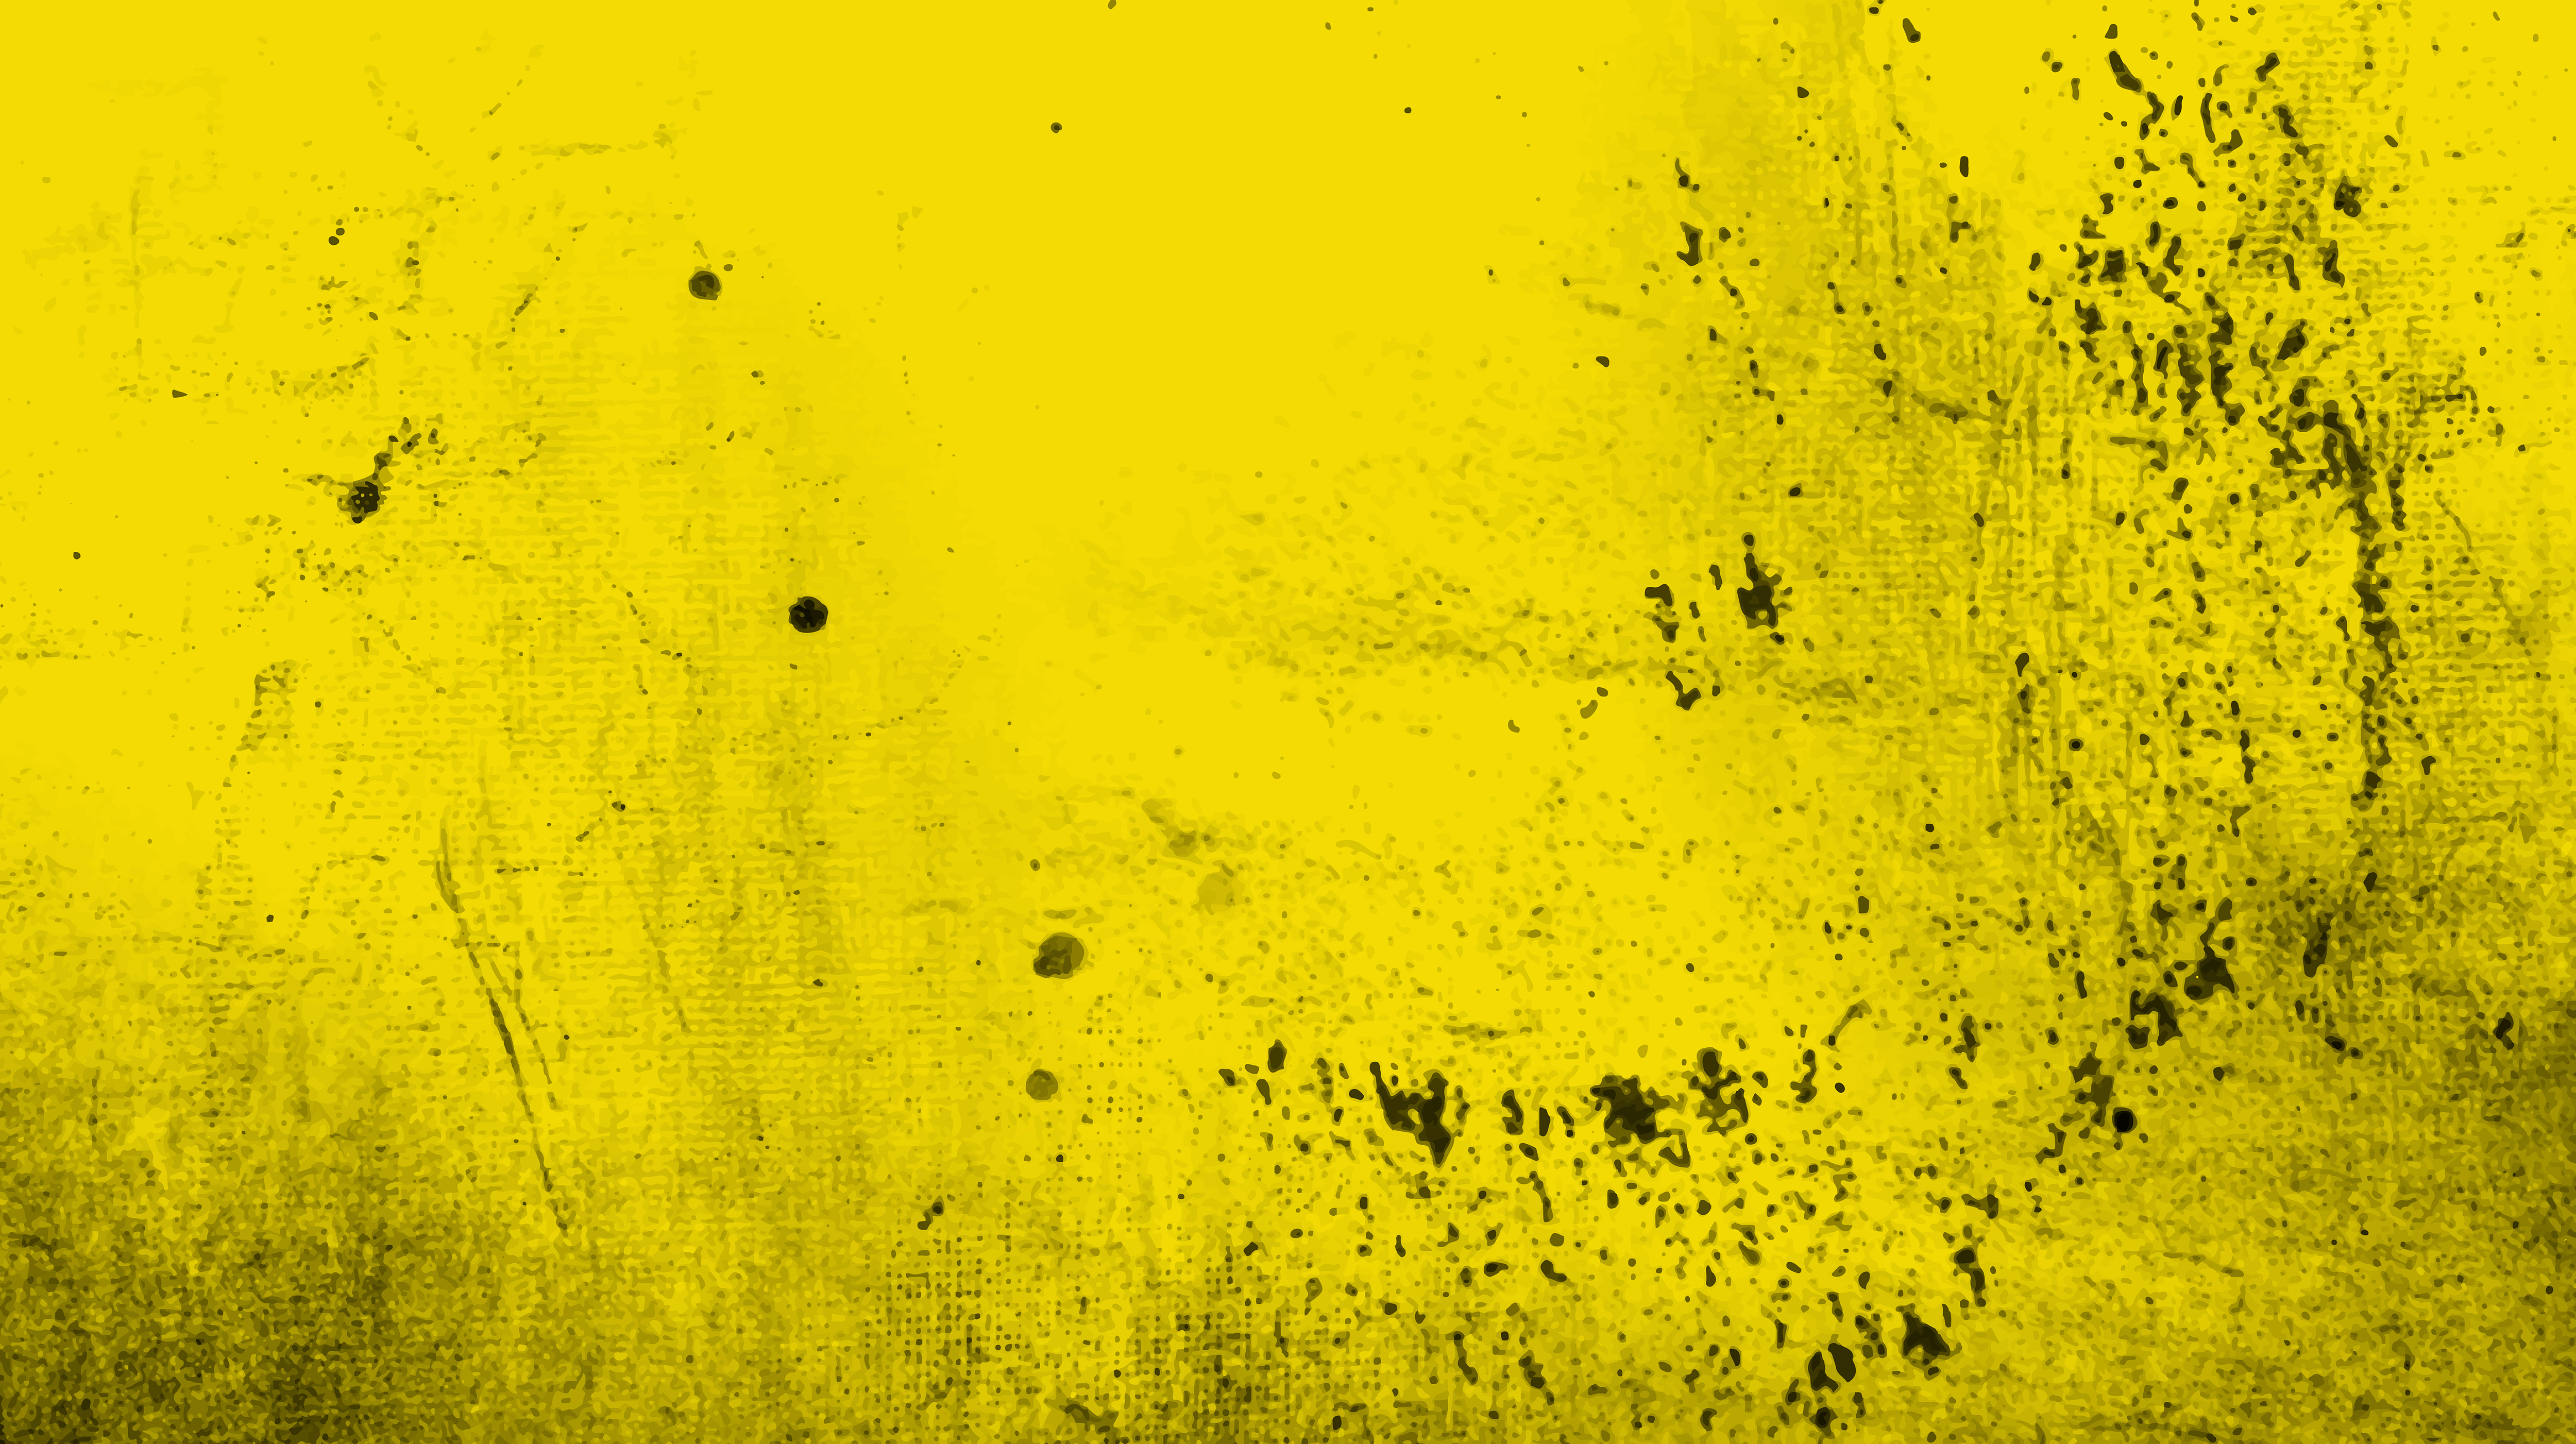 Download Distressed yellow background - Download Free Vectors, Clipart Graphics & Vector Art